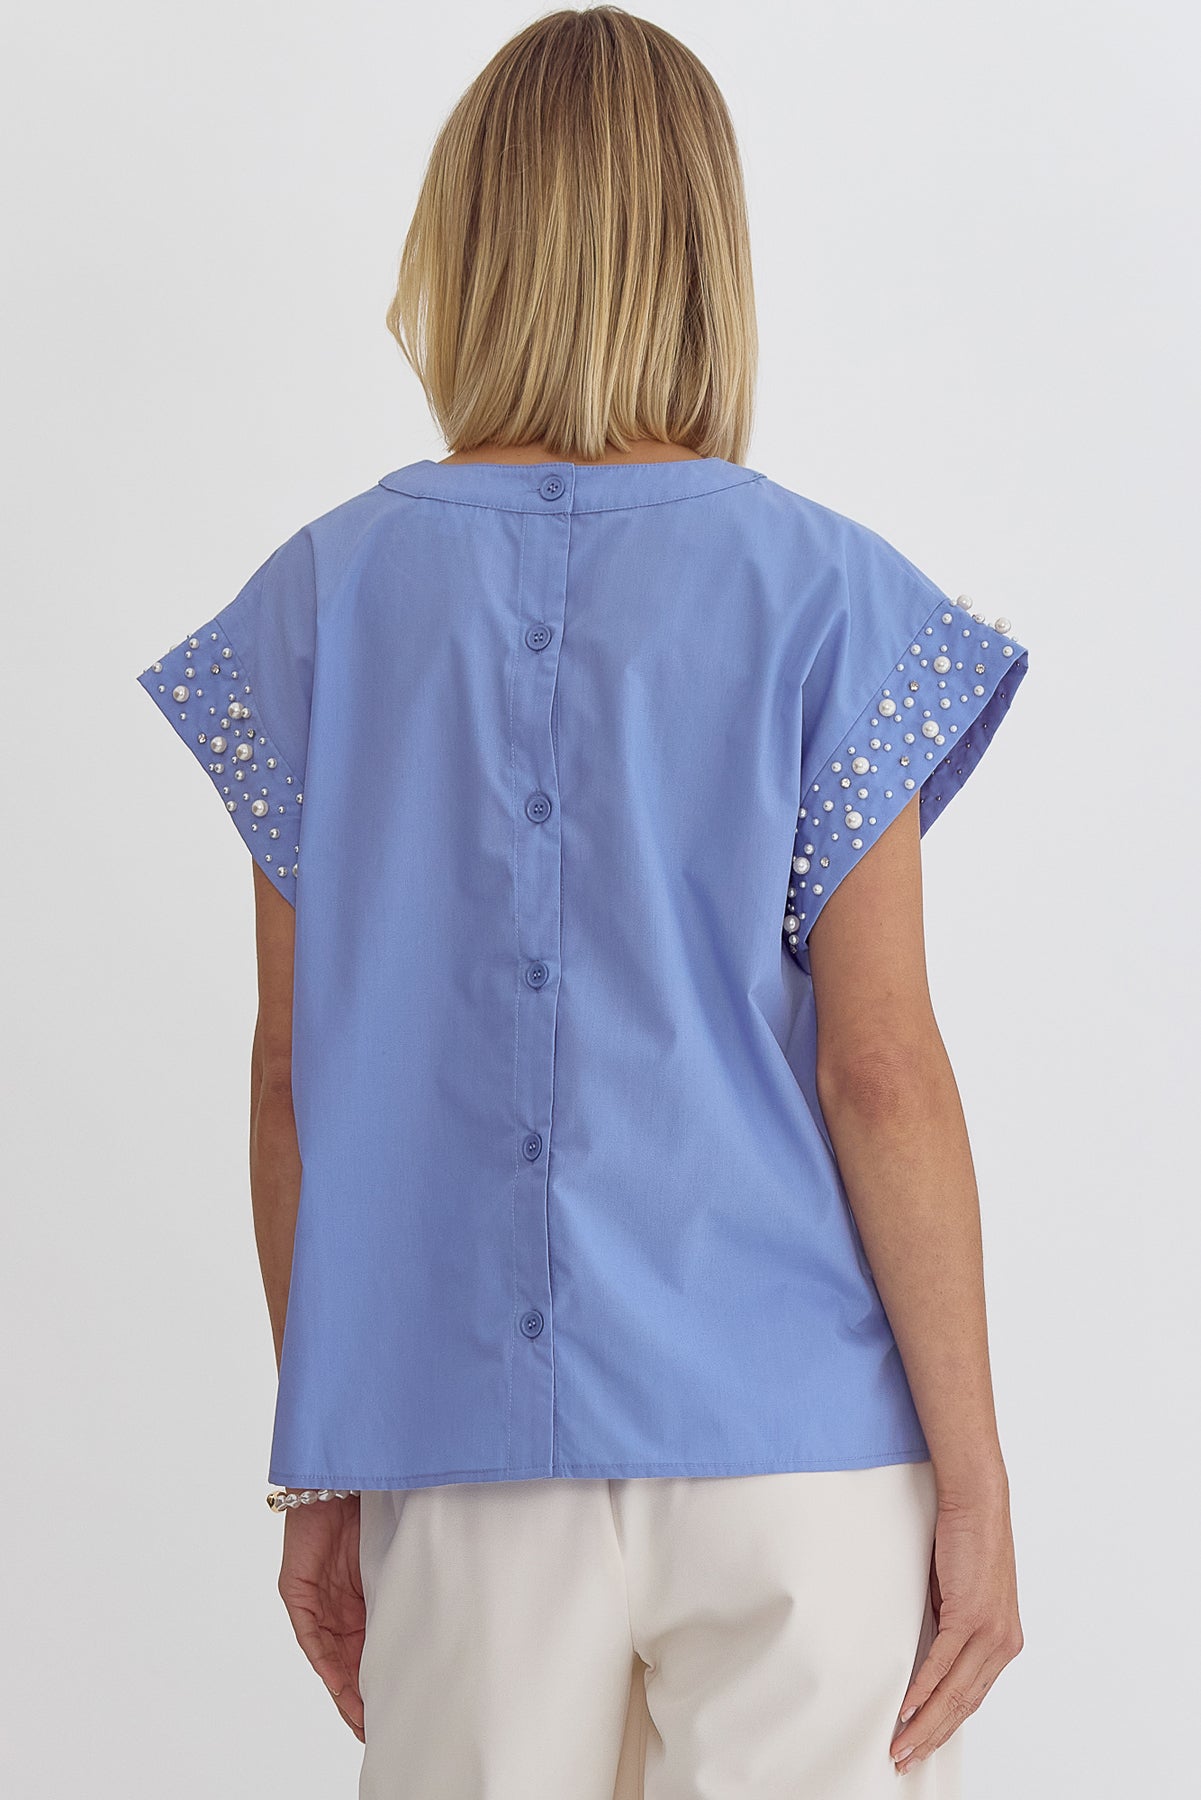 She Is Grace Pearl Embellished Top